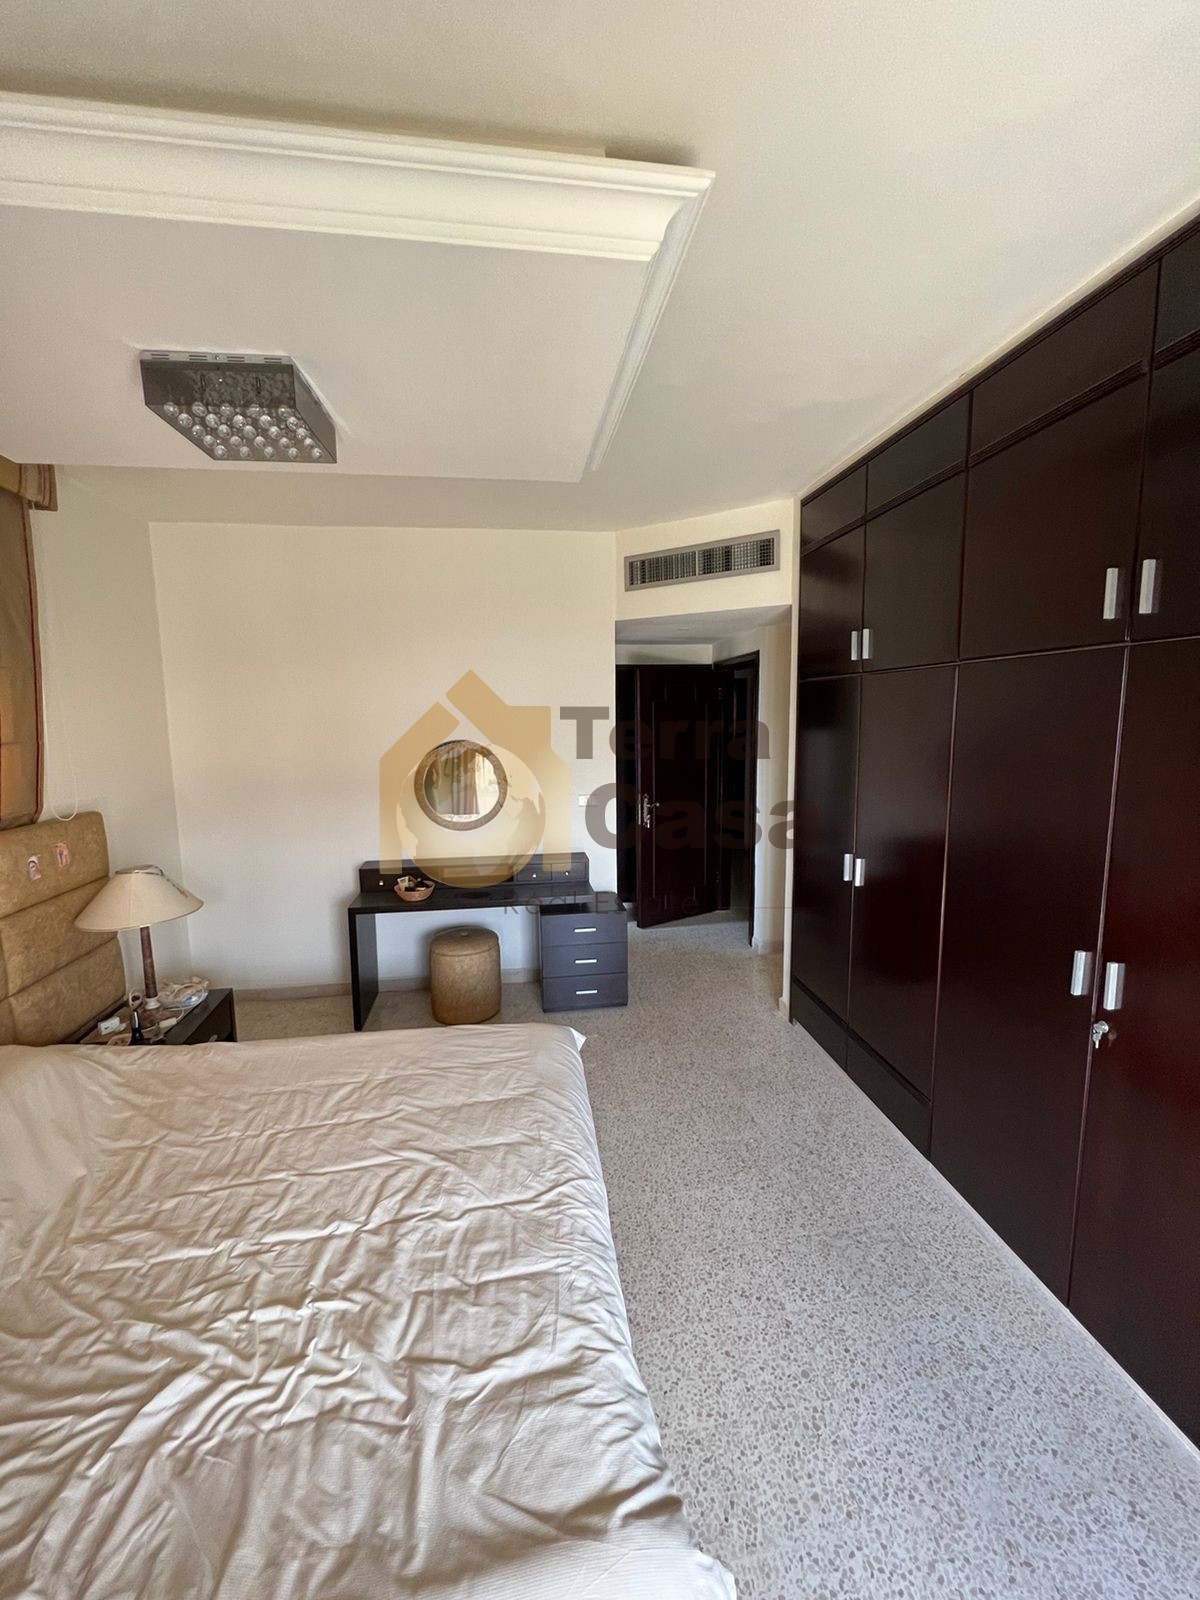 Aoukar fully decorated apartment open view